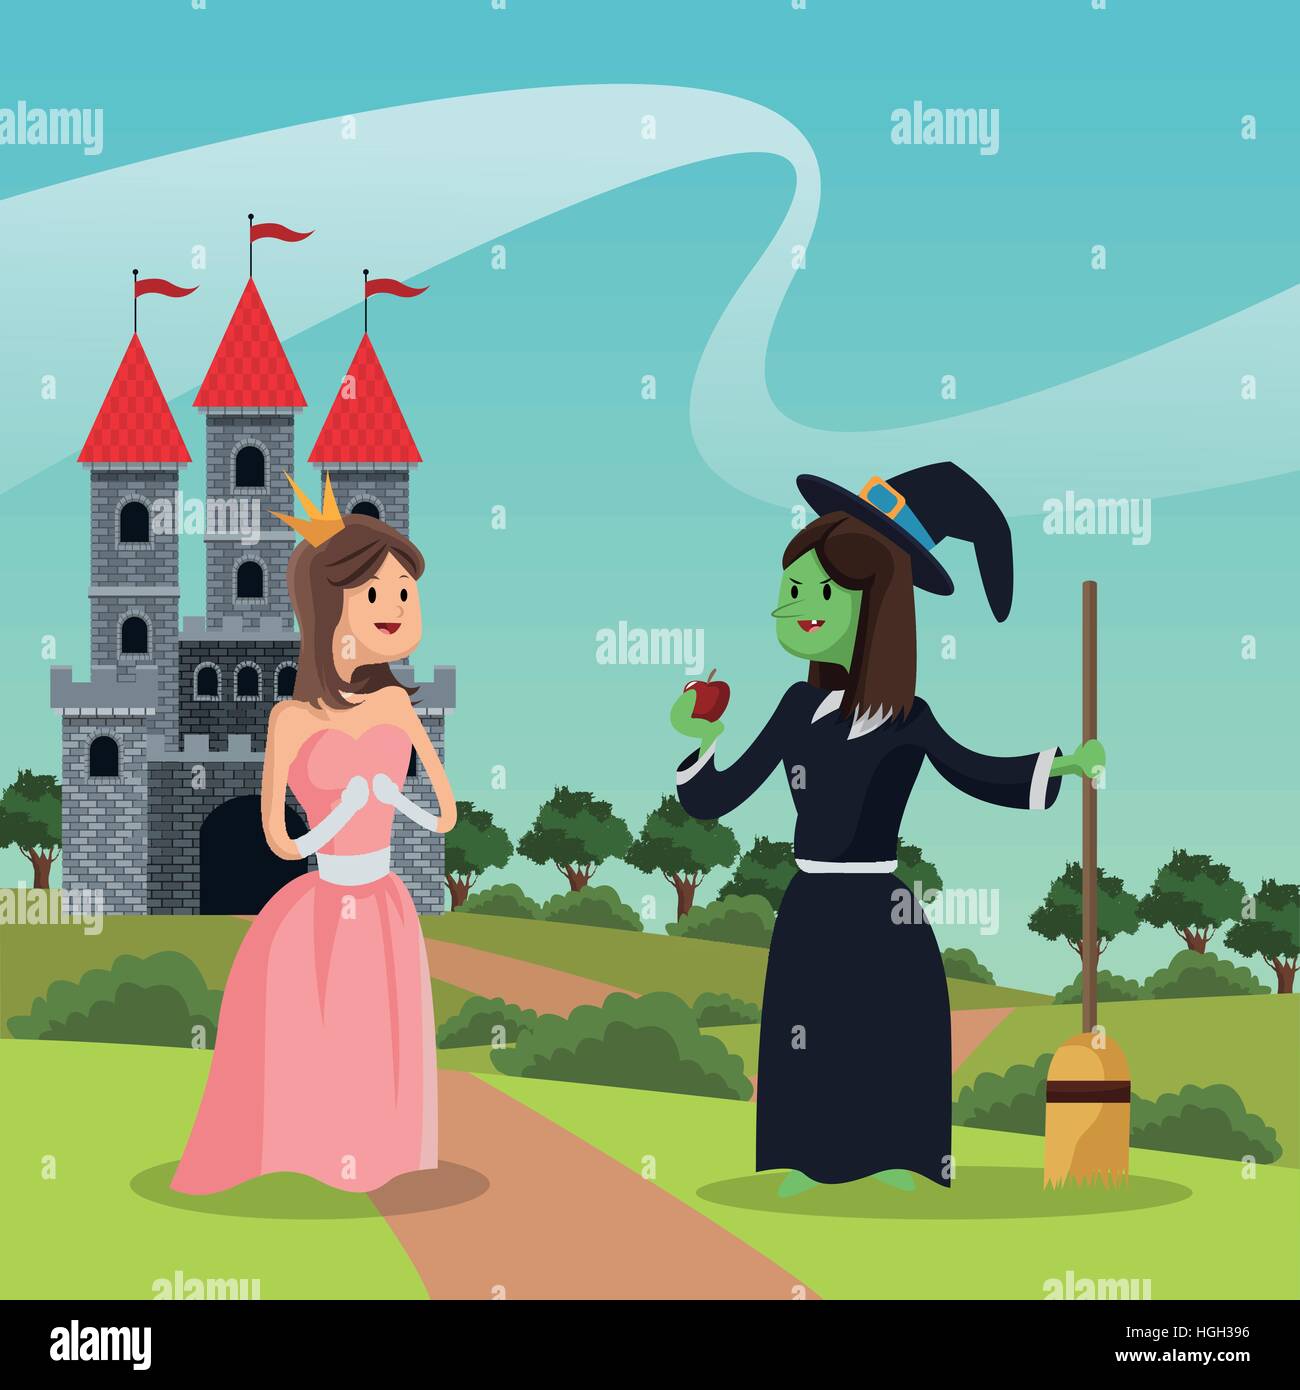 The Princess and the Witch